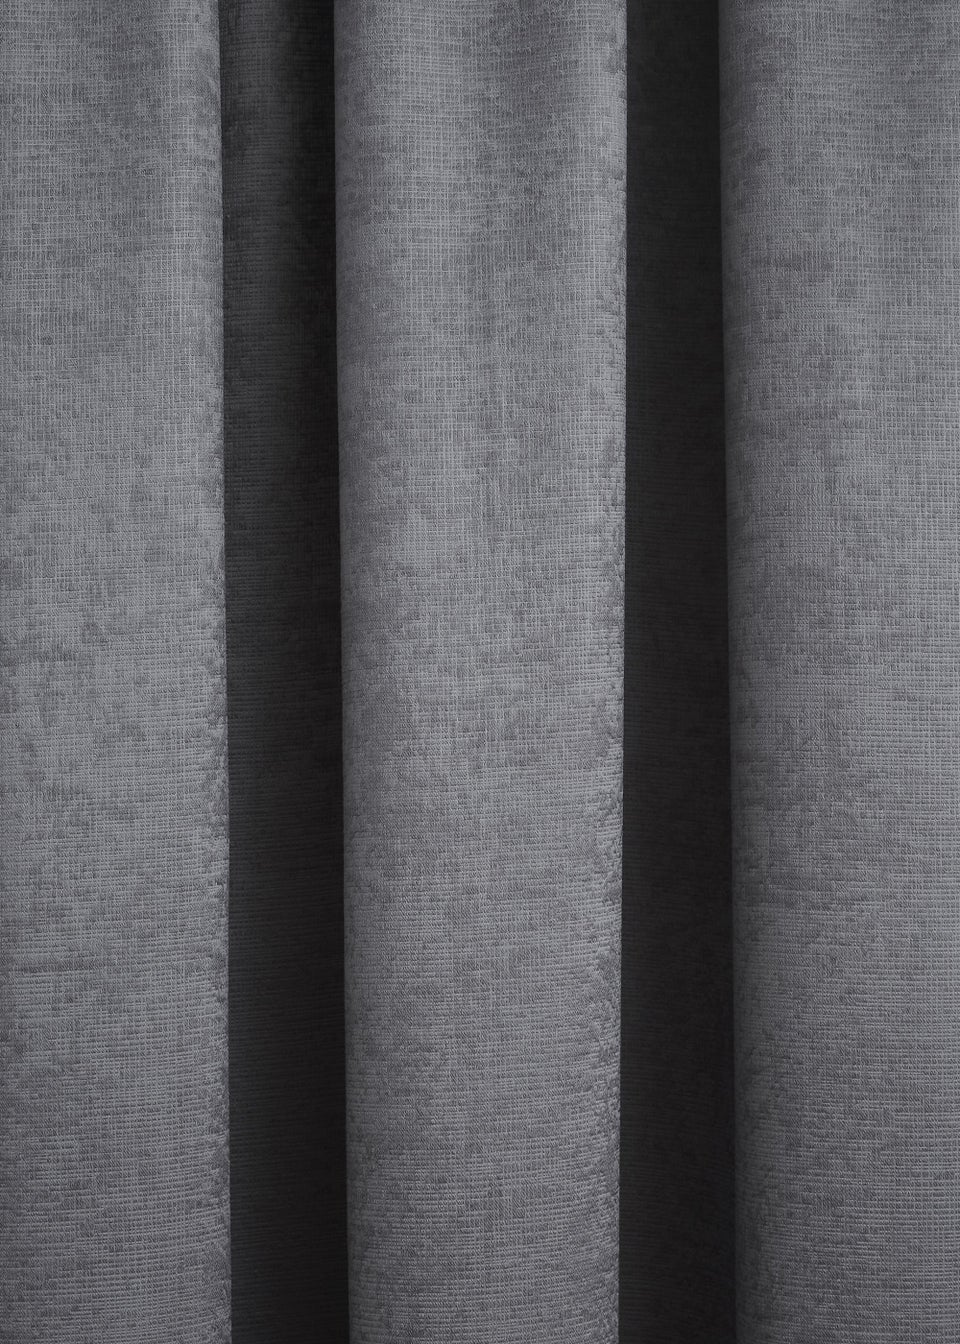 Fusion Galaxy Dimout Grey Pencil Pleat Curtains